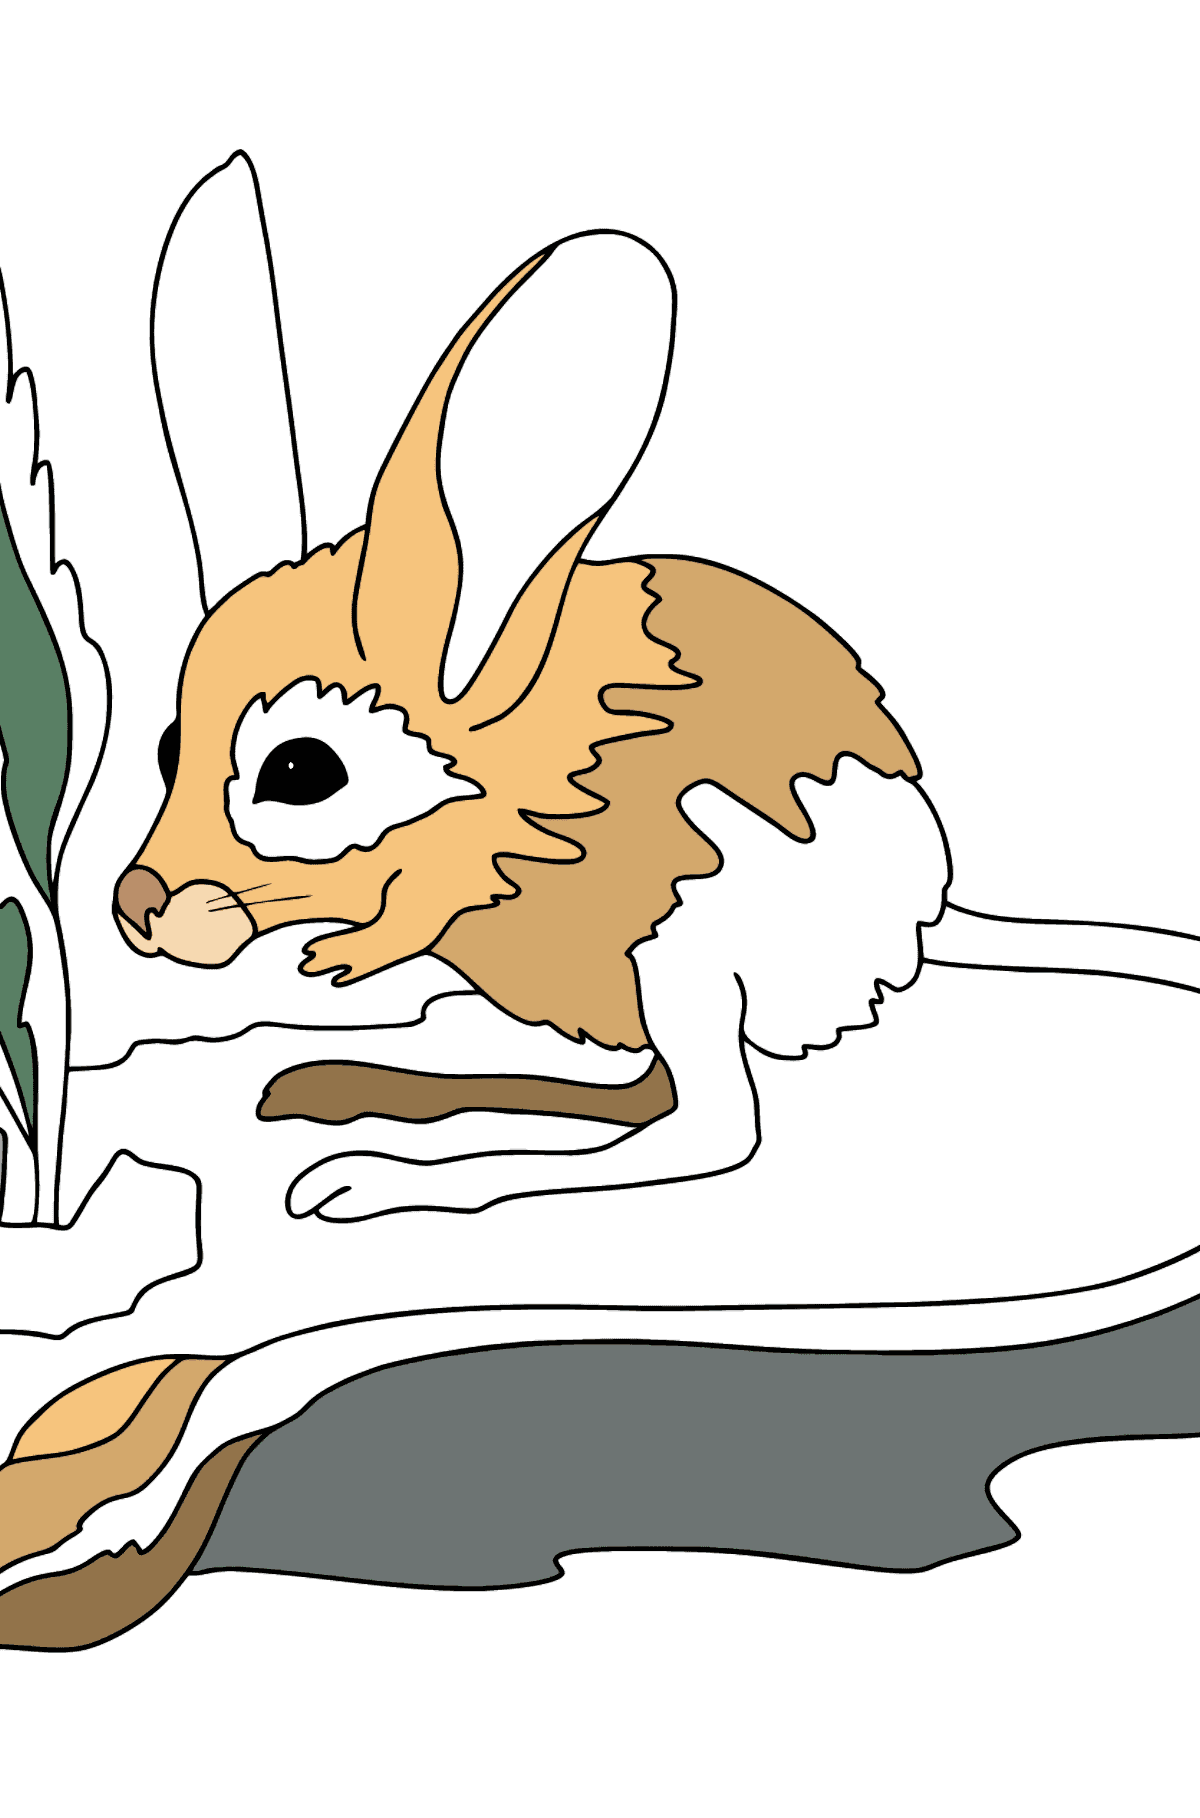 Coloring Page - A Jerboa is Looking Scared - Coloring Pages for Kids